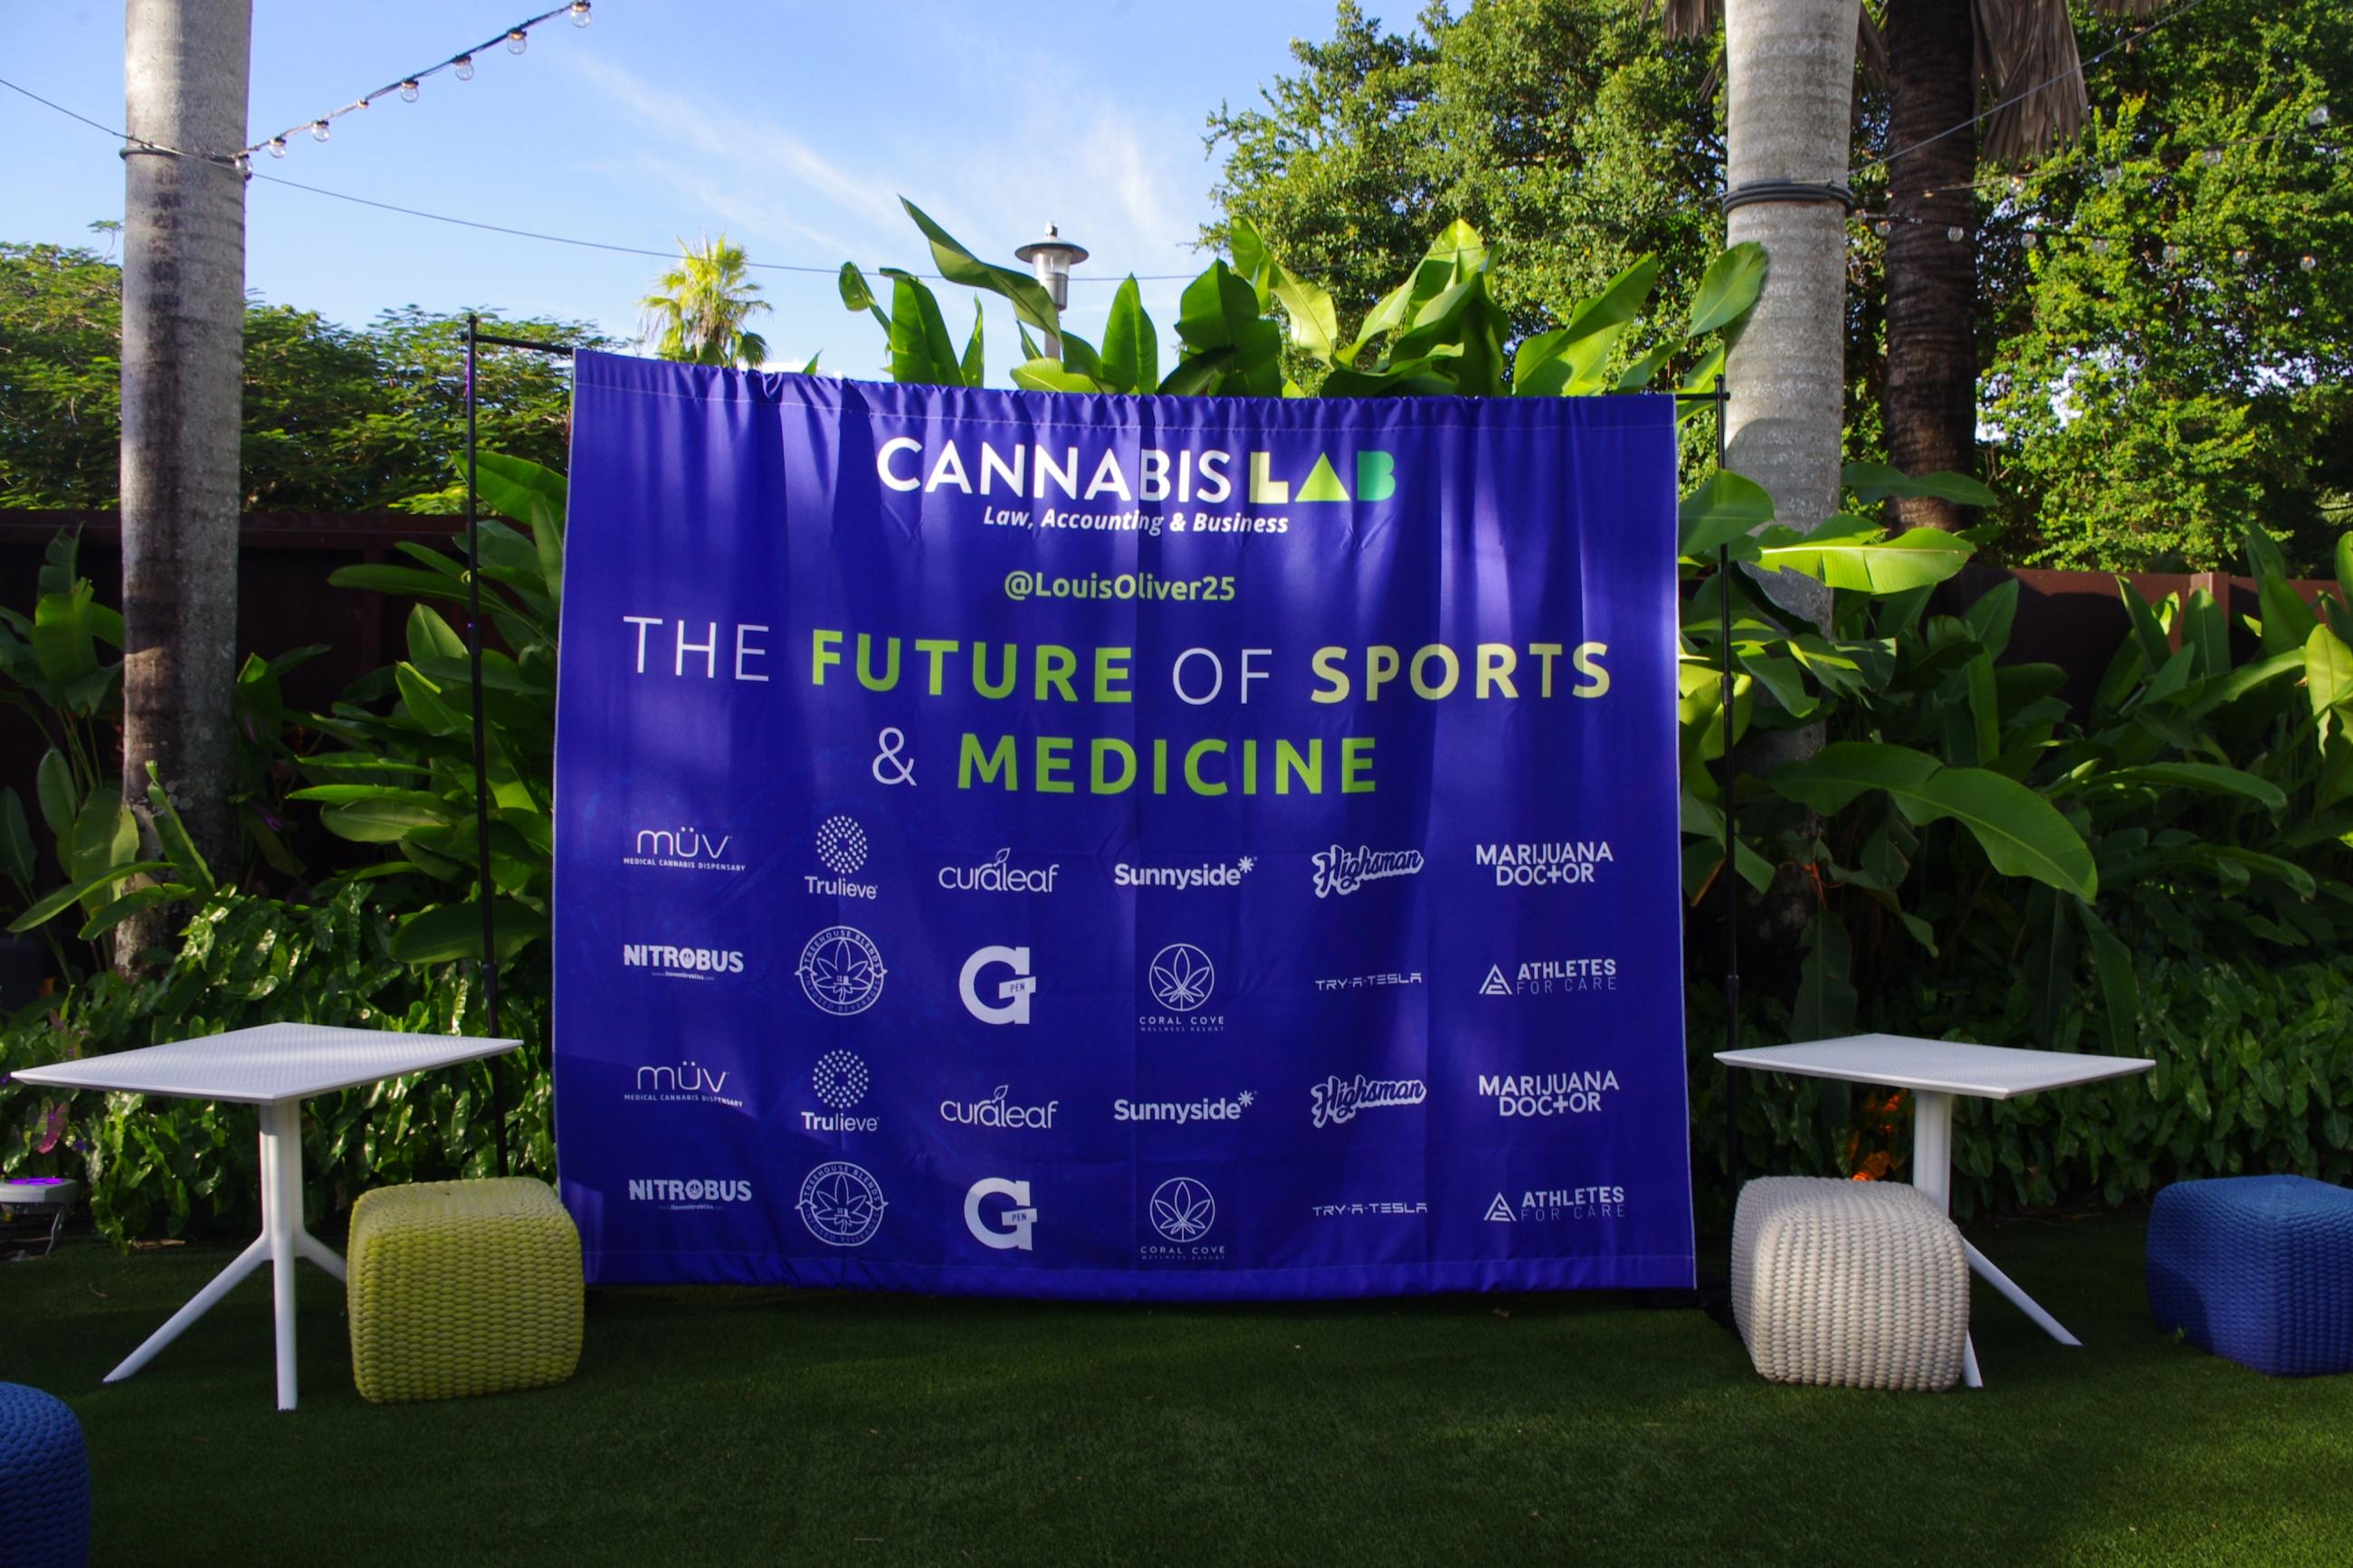 The future of sports & medicine event in Miami, Florida with Marijuana Doctor MMJ doctors picturing a blue promotional sign with medical cannabis brands listed & tropical plants in the background 